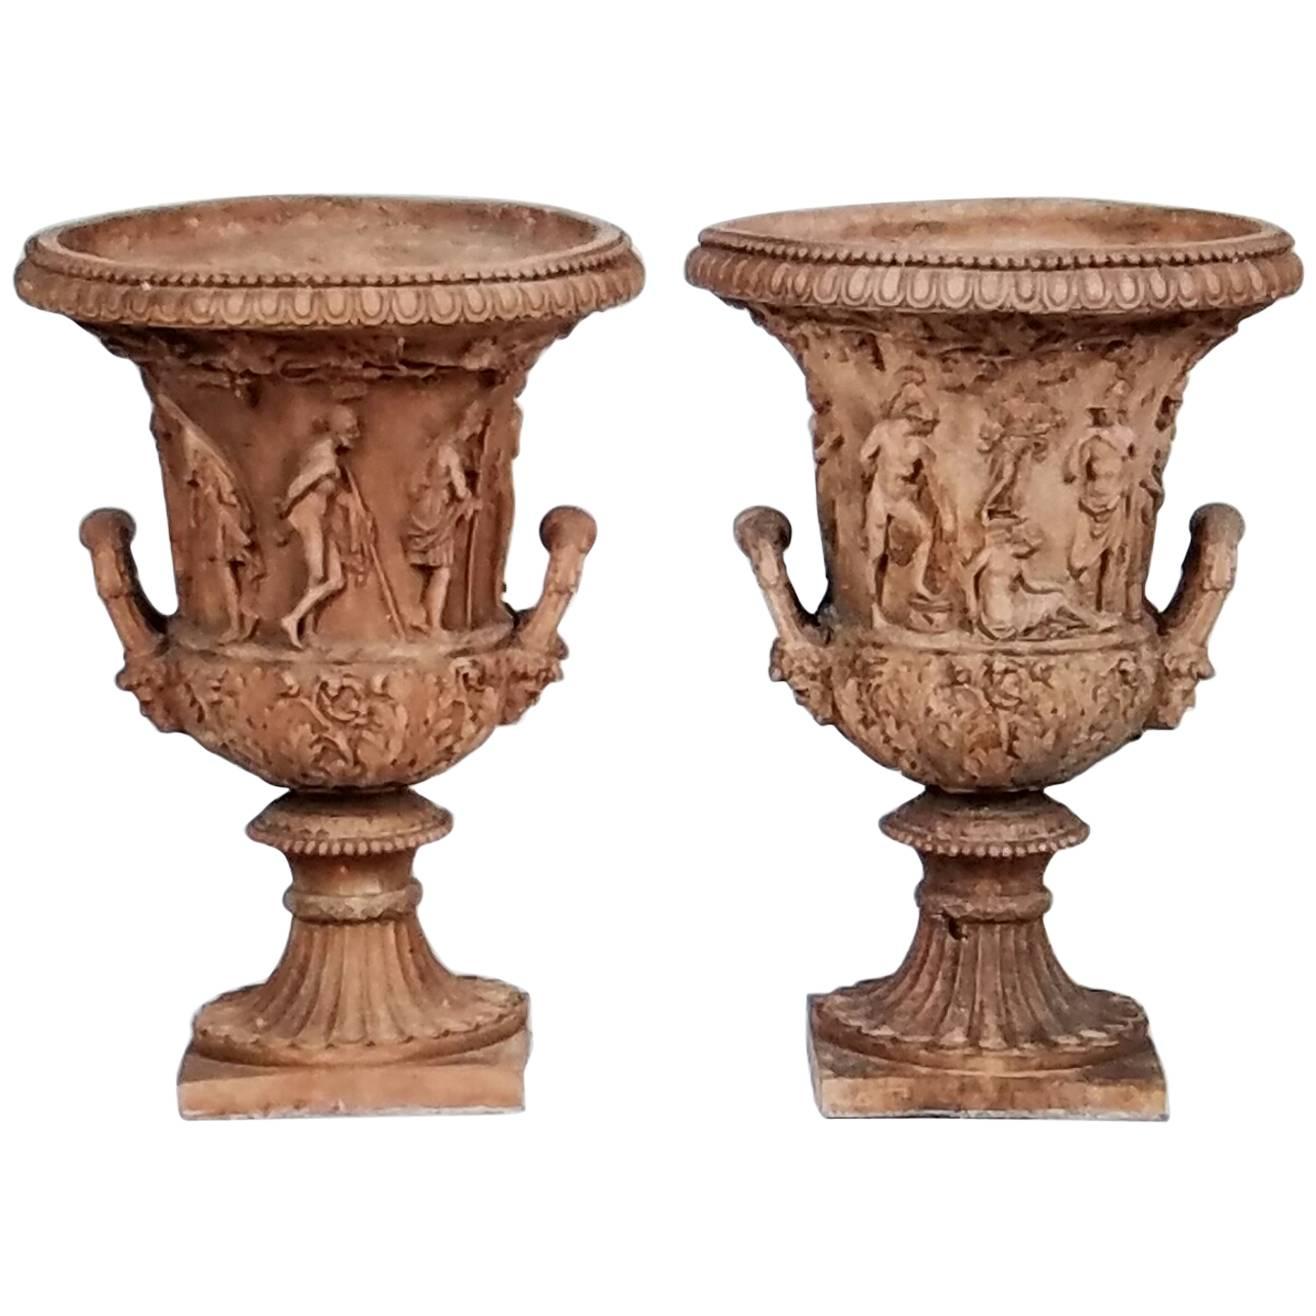 Pair of Late 18th-Early 19th Century Terra Cotta Urns 